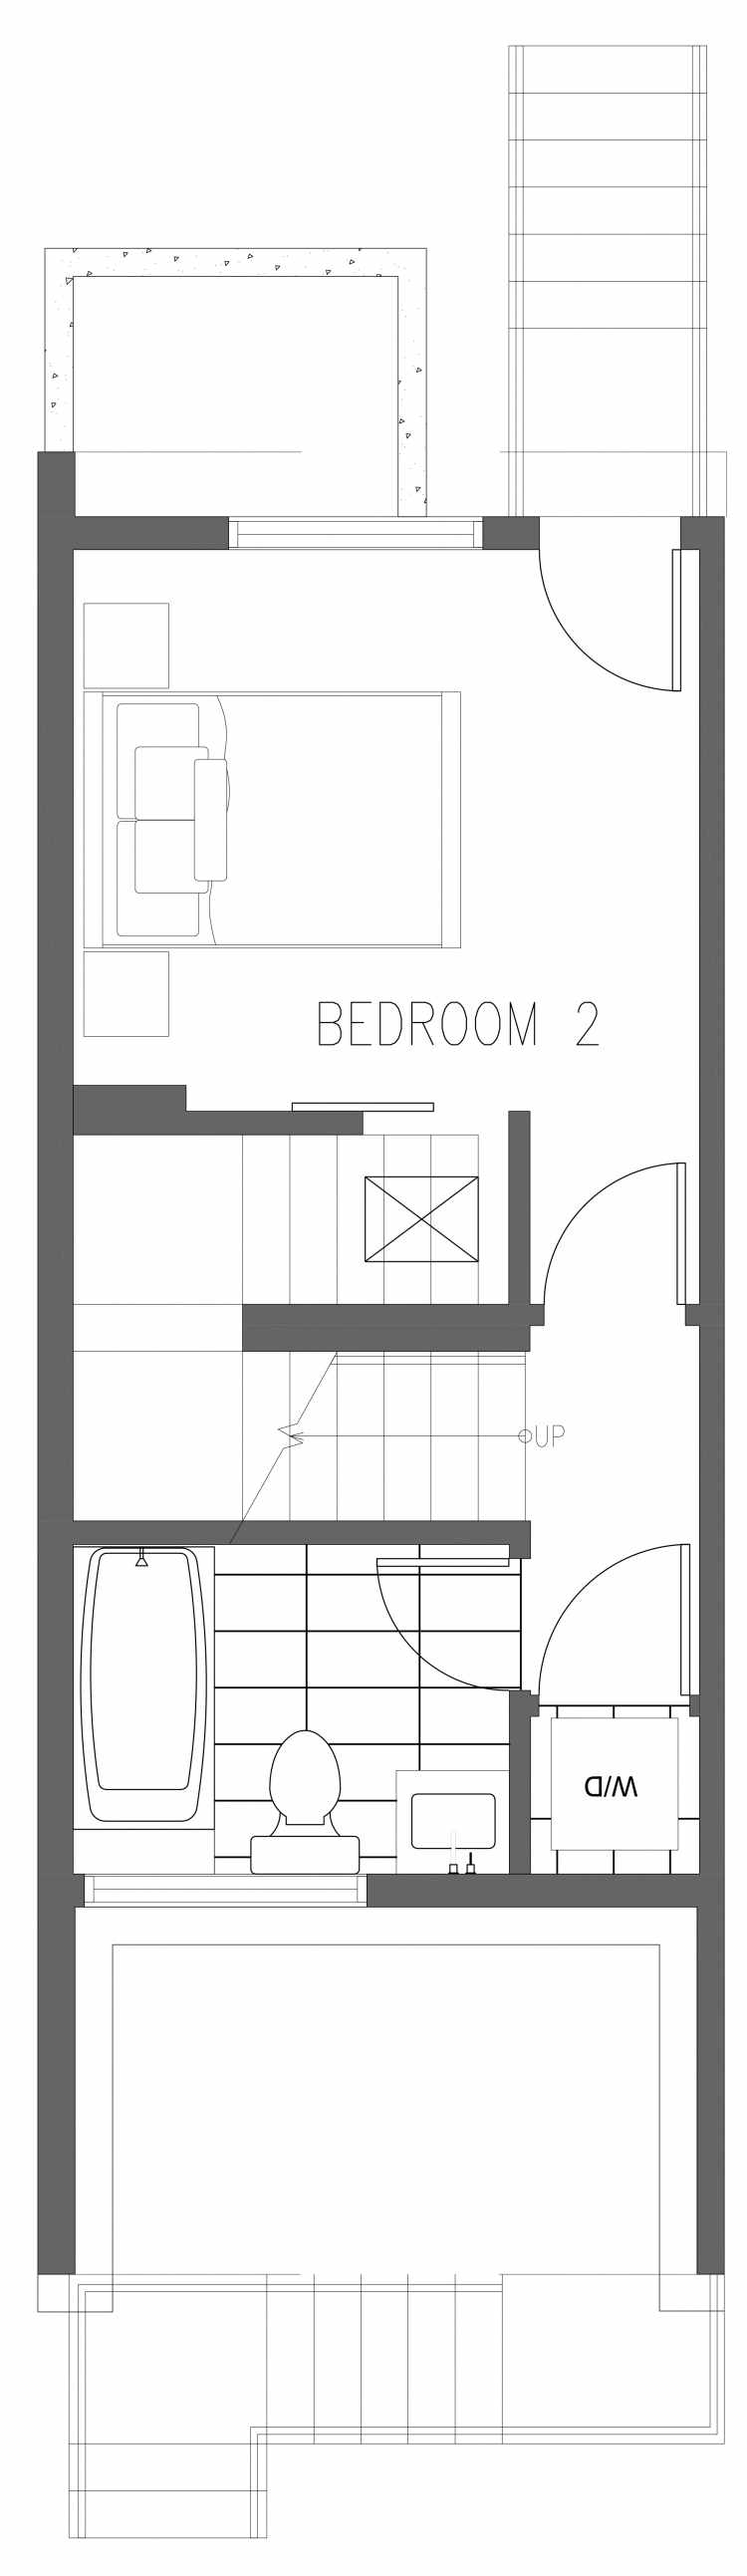 First Floor Plan of 2365 Beacon Ave S, One of the Brea Townhomes in North Beacon Hill